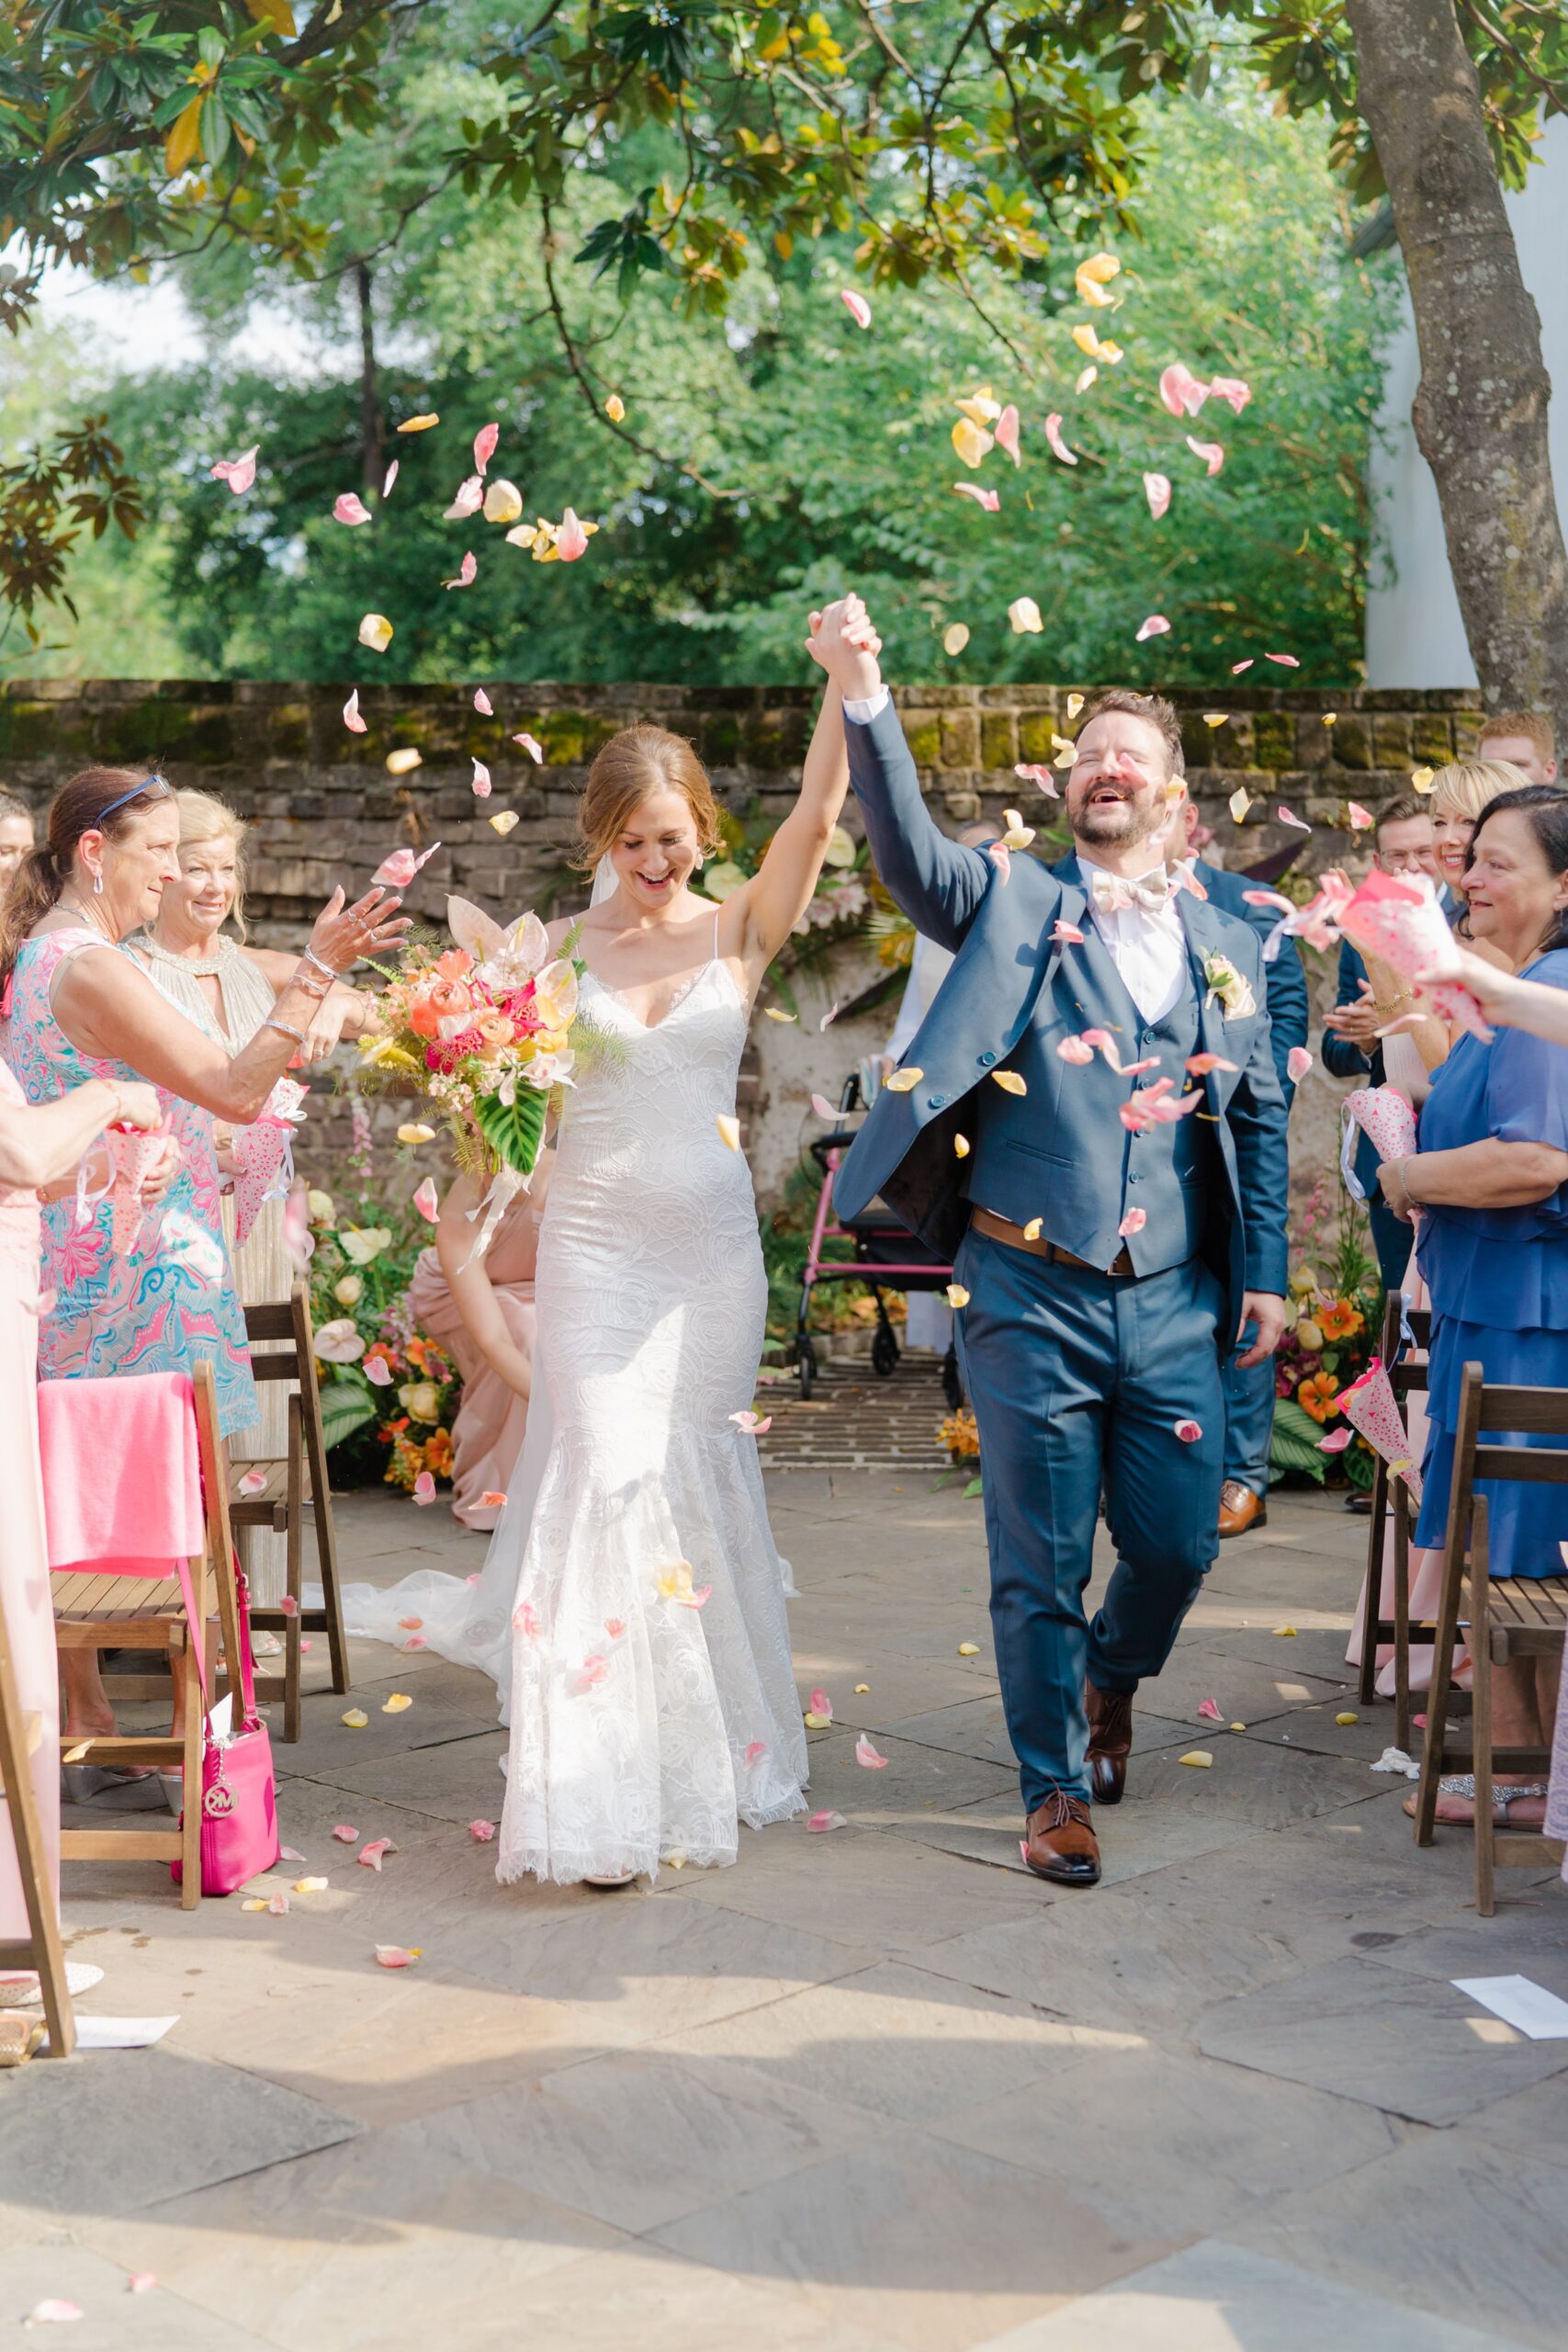 Pink petal toss outdoor wedding ceremony exit. Elated bride and groom walk down the aisle.